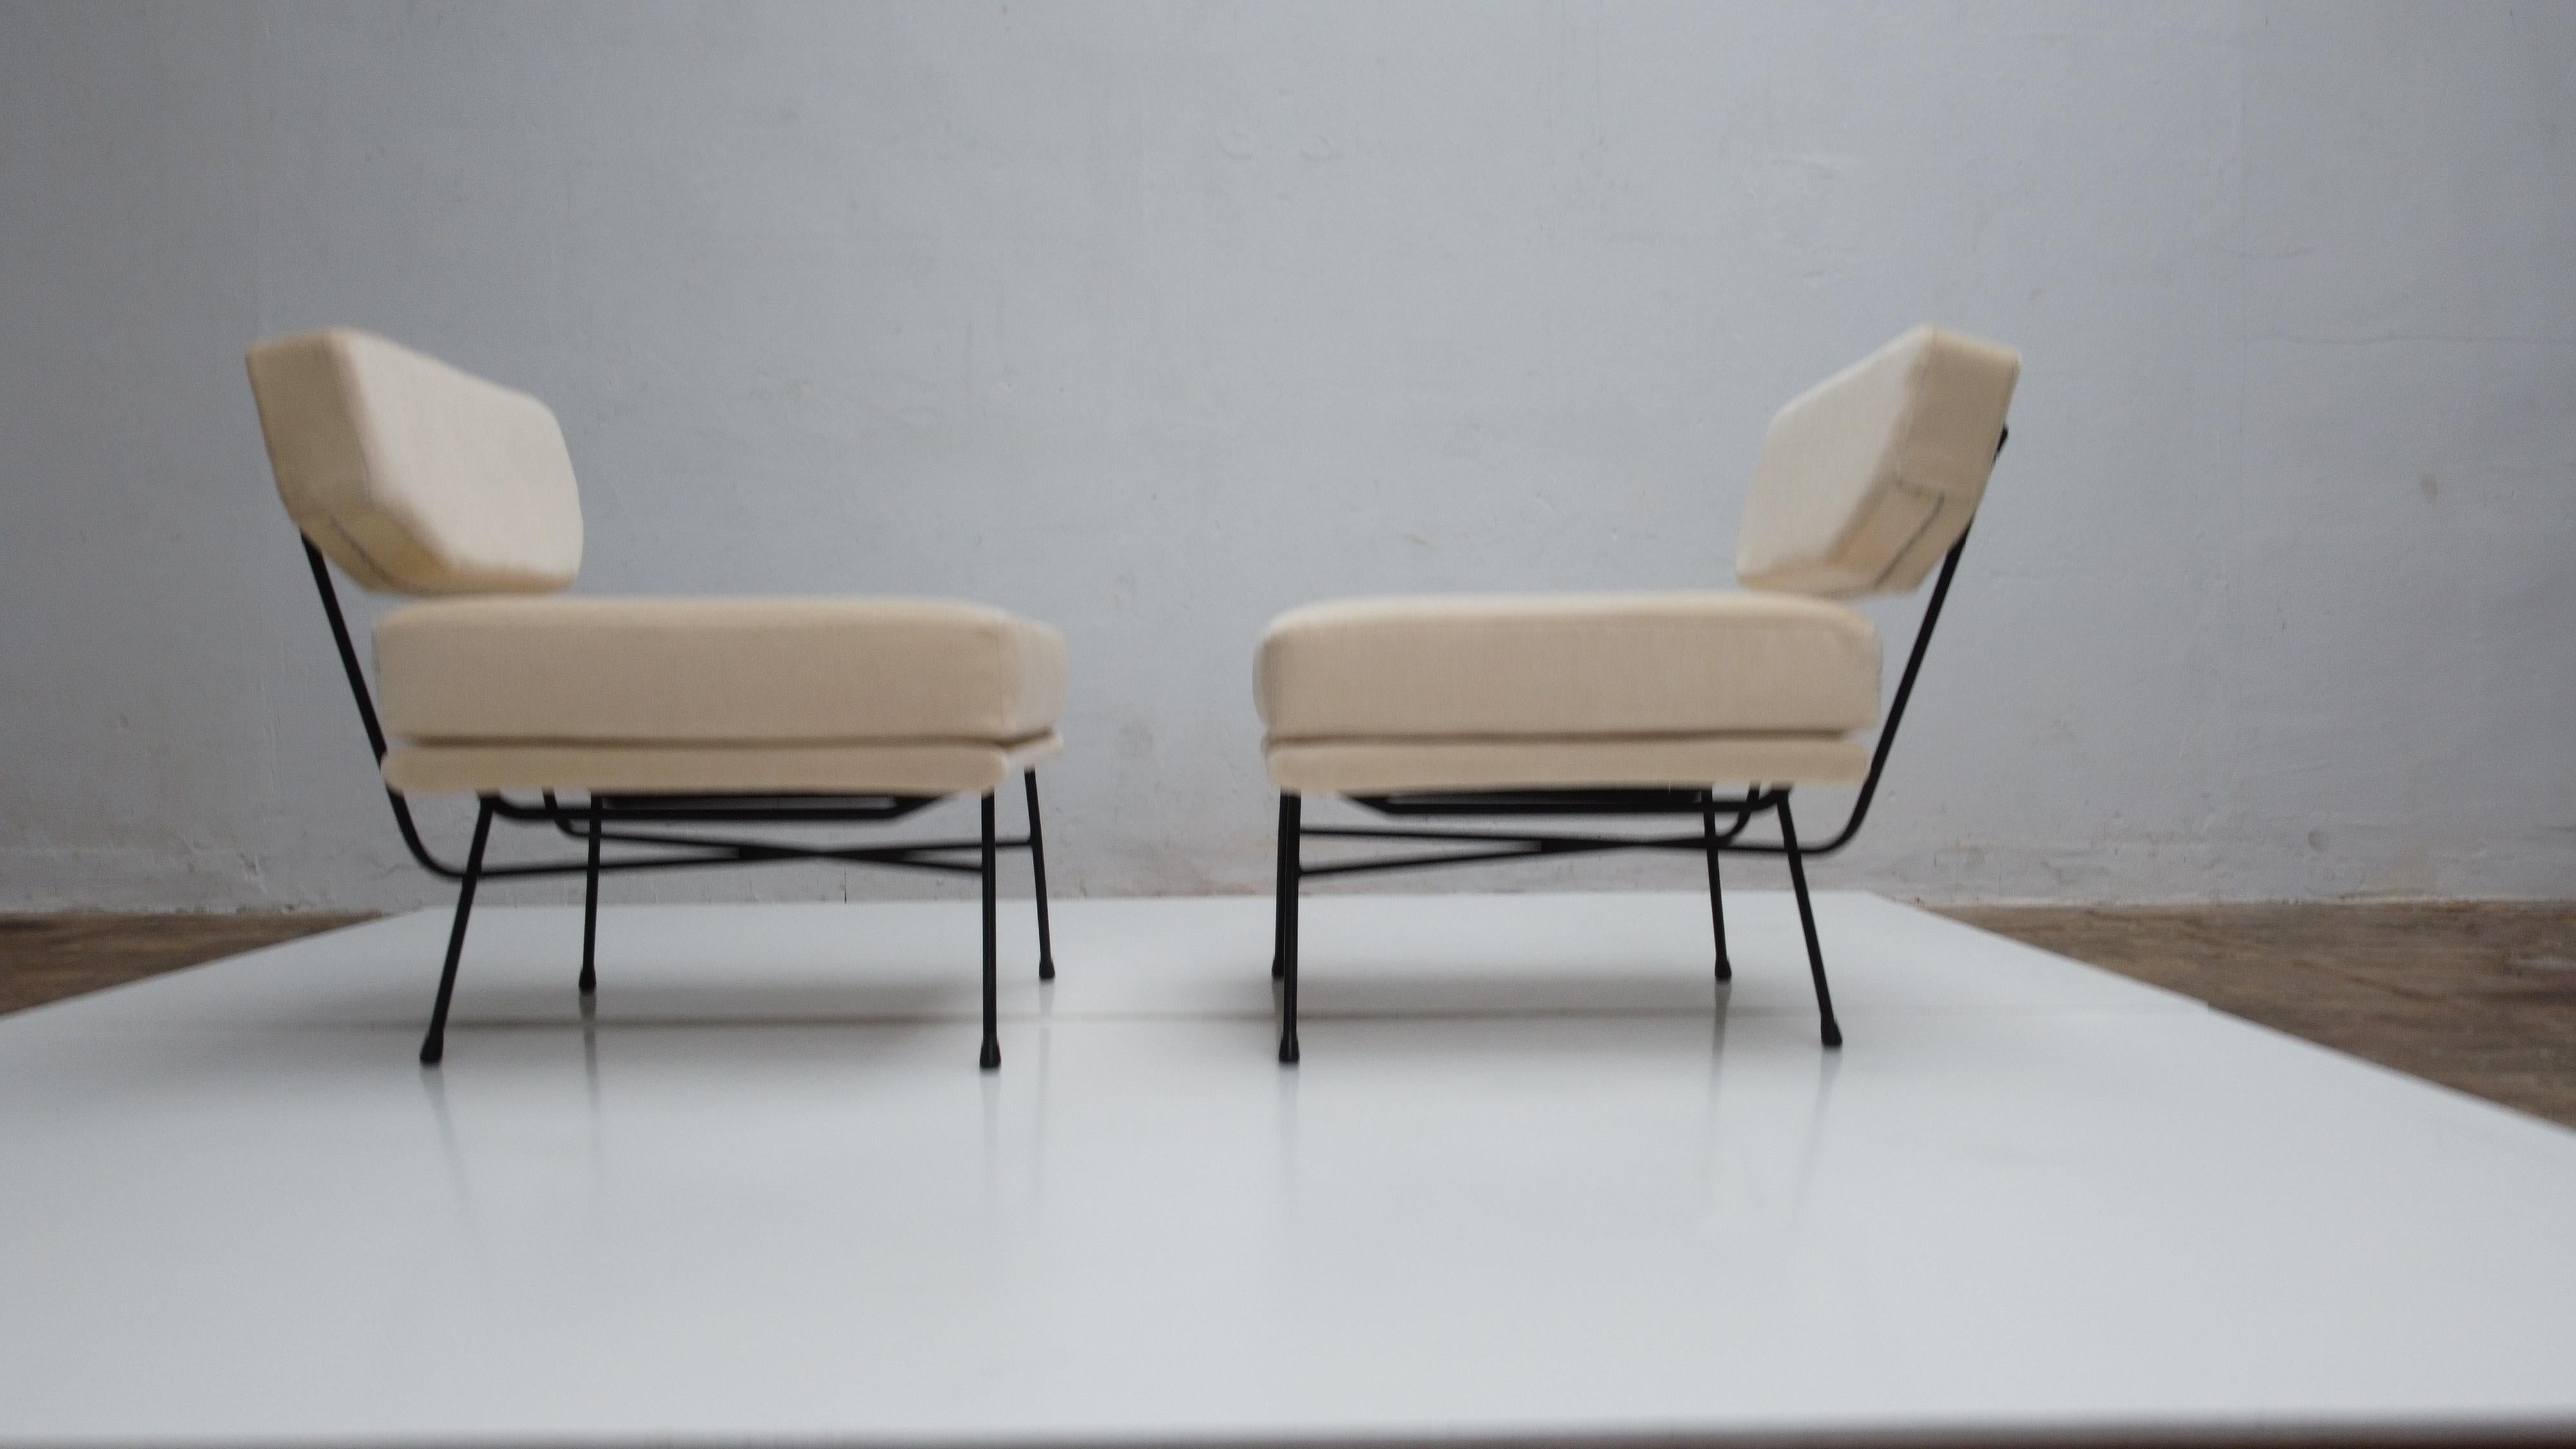 Pair of 'Elettra' Lounge Chairs by BBPR, Arflex, Italy 1953, Compasso D'Oro 1954 For Sale 2